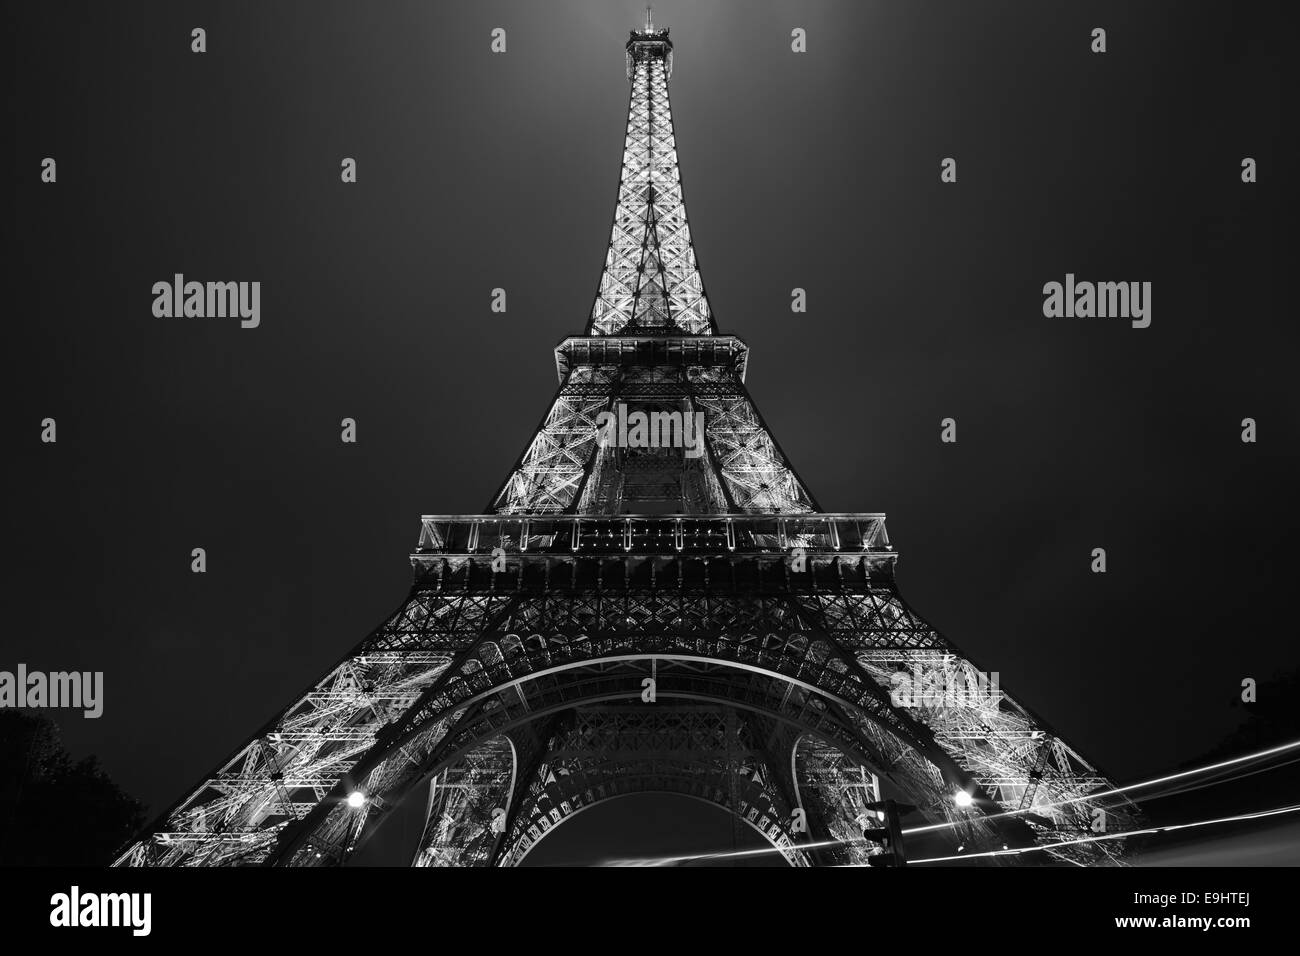 Eiffel tower in Paris at night, low angle view, black and white Stock Photo